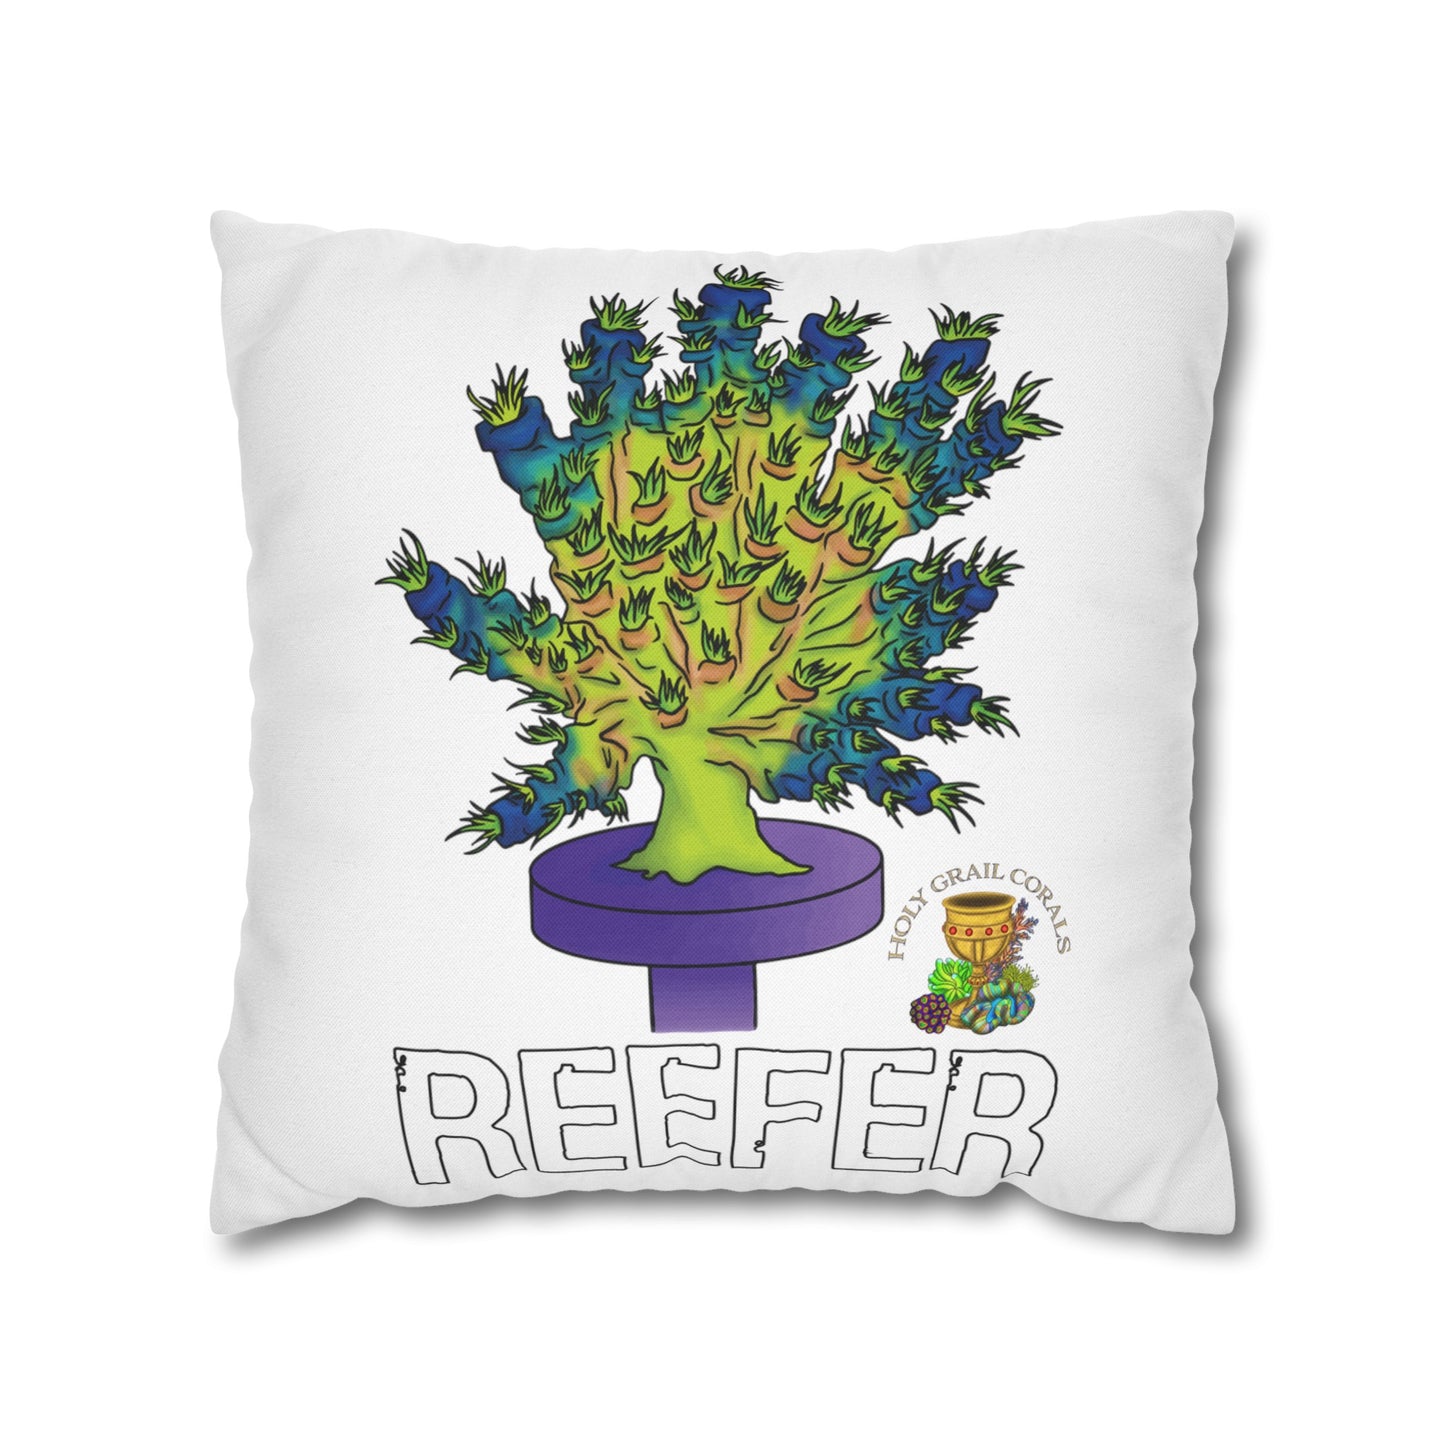 "Reefer" Acropora Colony Square Pillow Cover